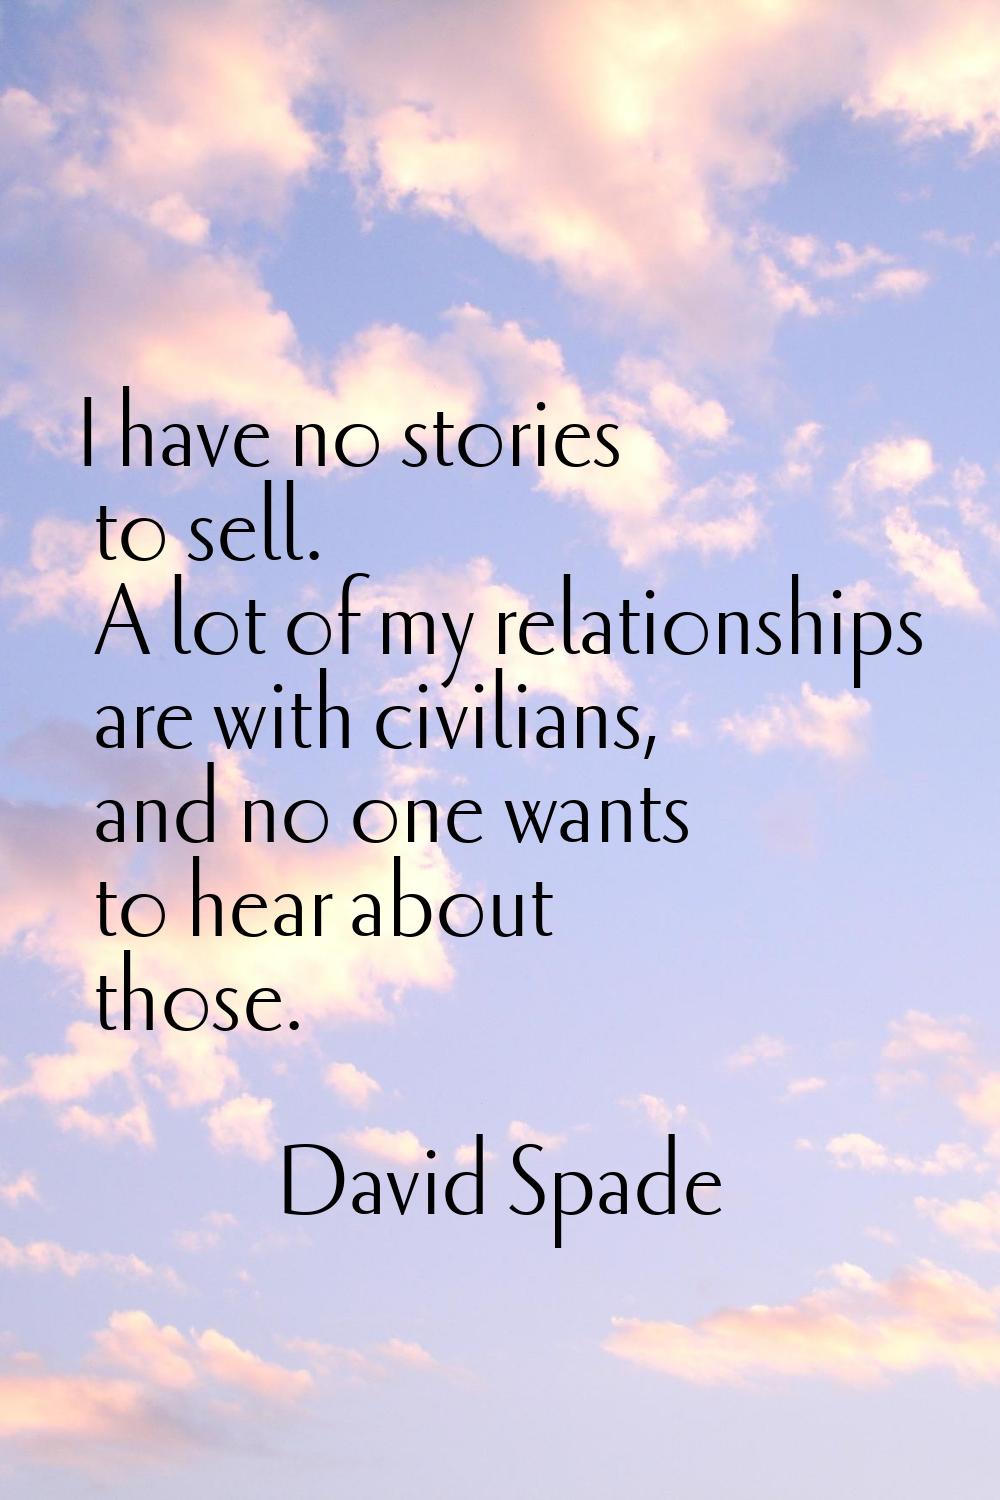 I have no stories to sell. A lot of my relationships are with civilians, and no one wants to hear a